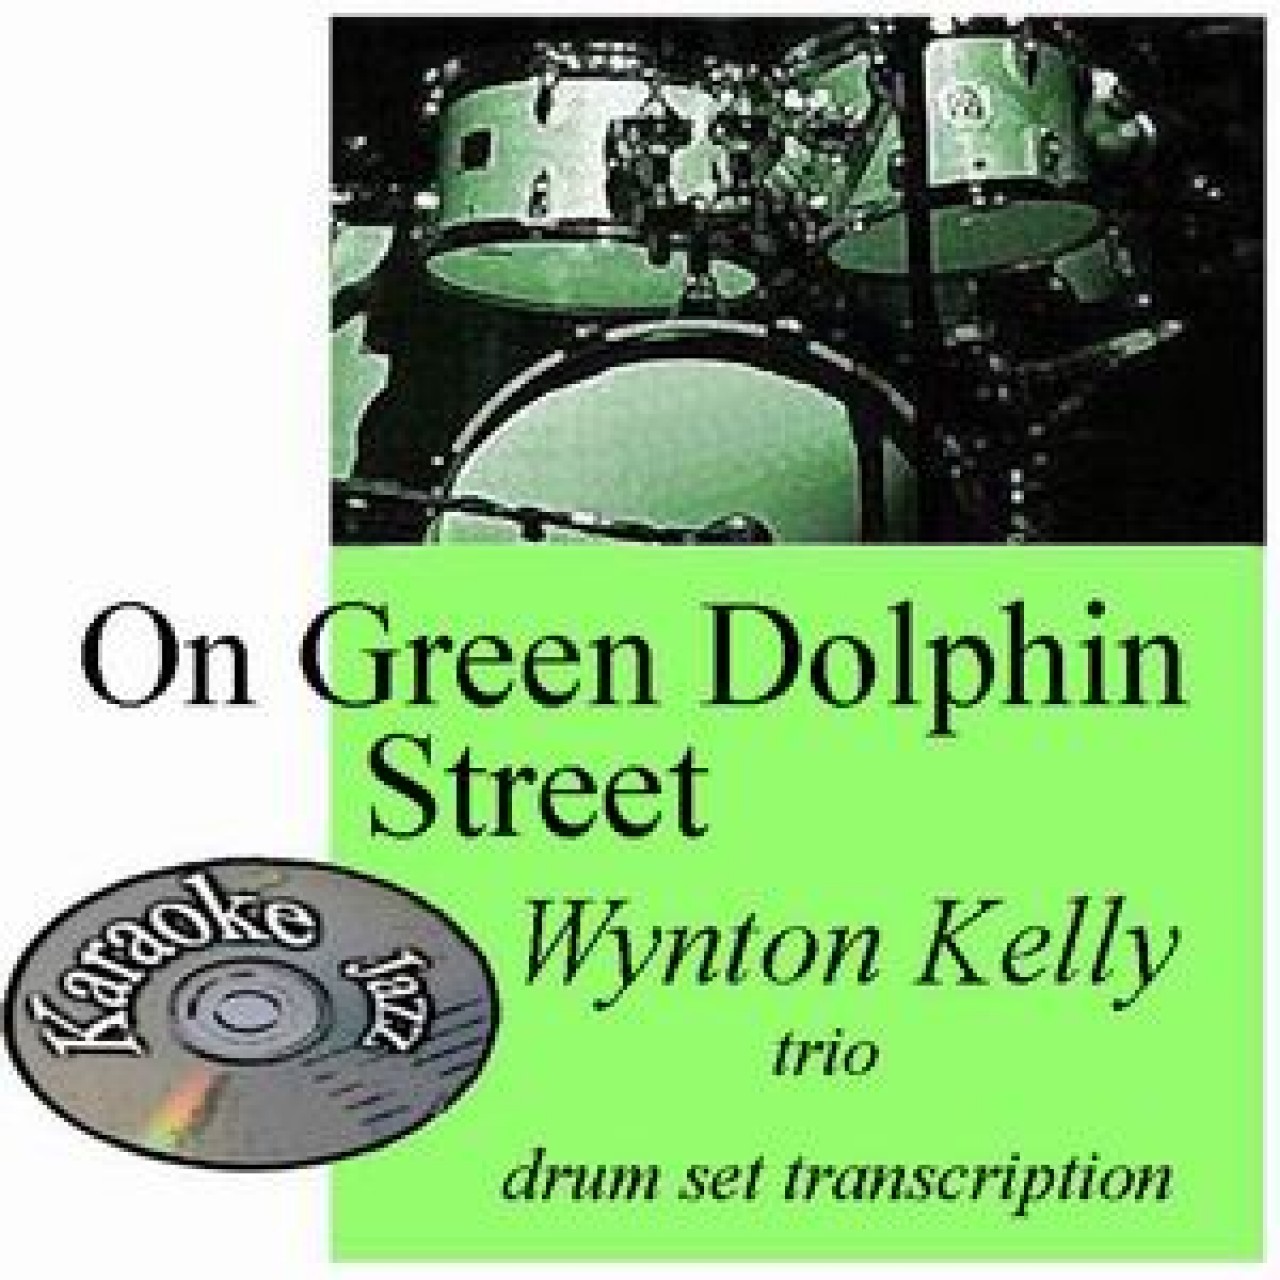 On Green Dolphin Street drums